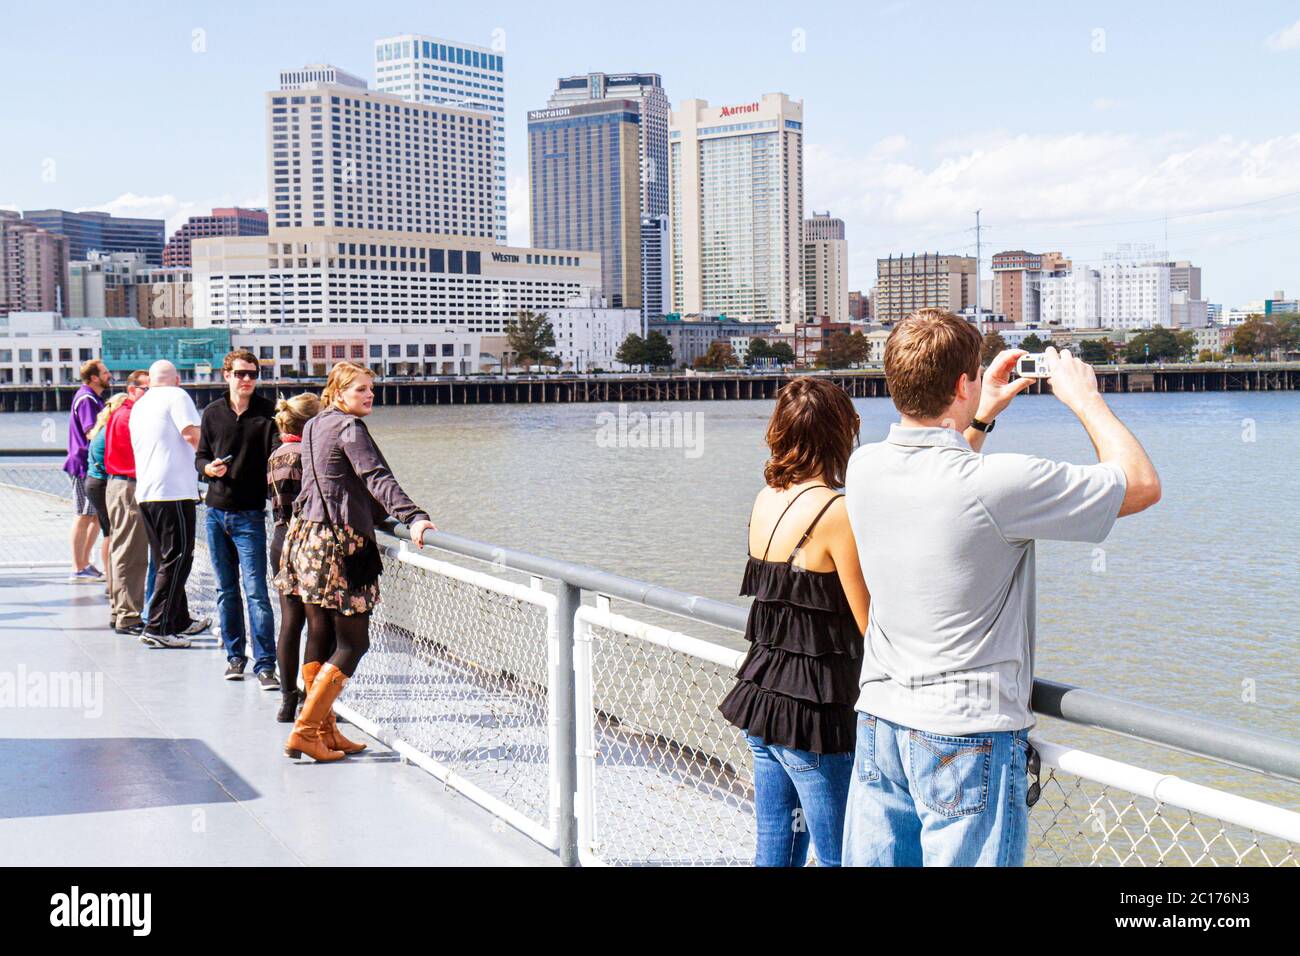 New Orleans Louisiana,Mississippi River,Canal Street Ferry,Algiers,CCCD,ferryboat,navigation,car ferry,inflight,passenger cabin,view,waterfront,buildi Stock Photo